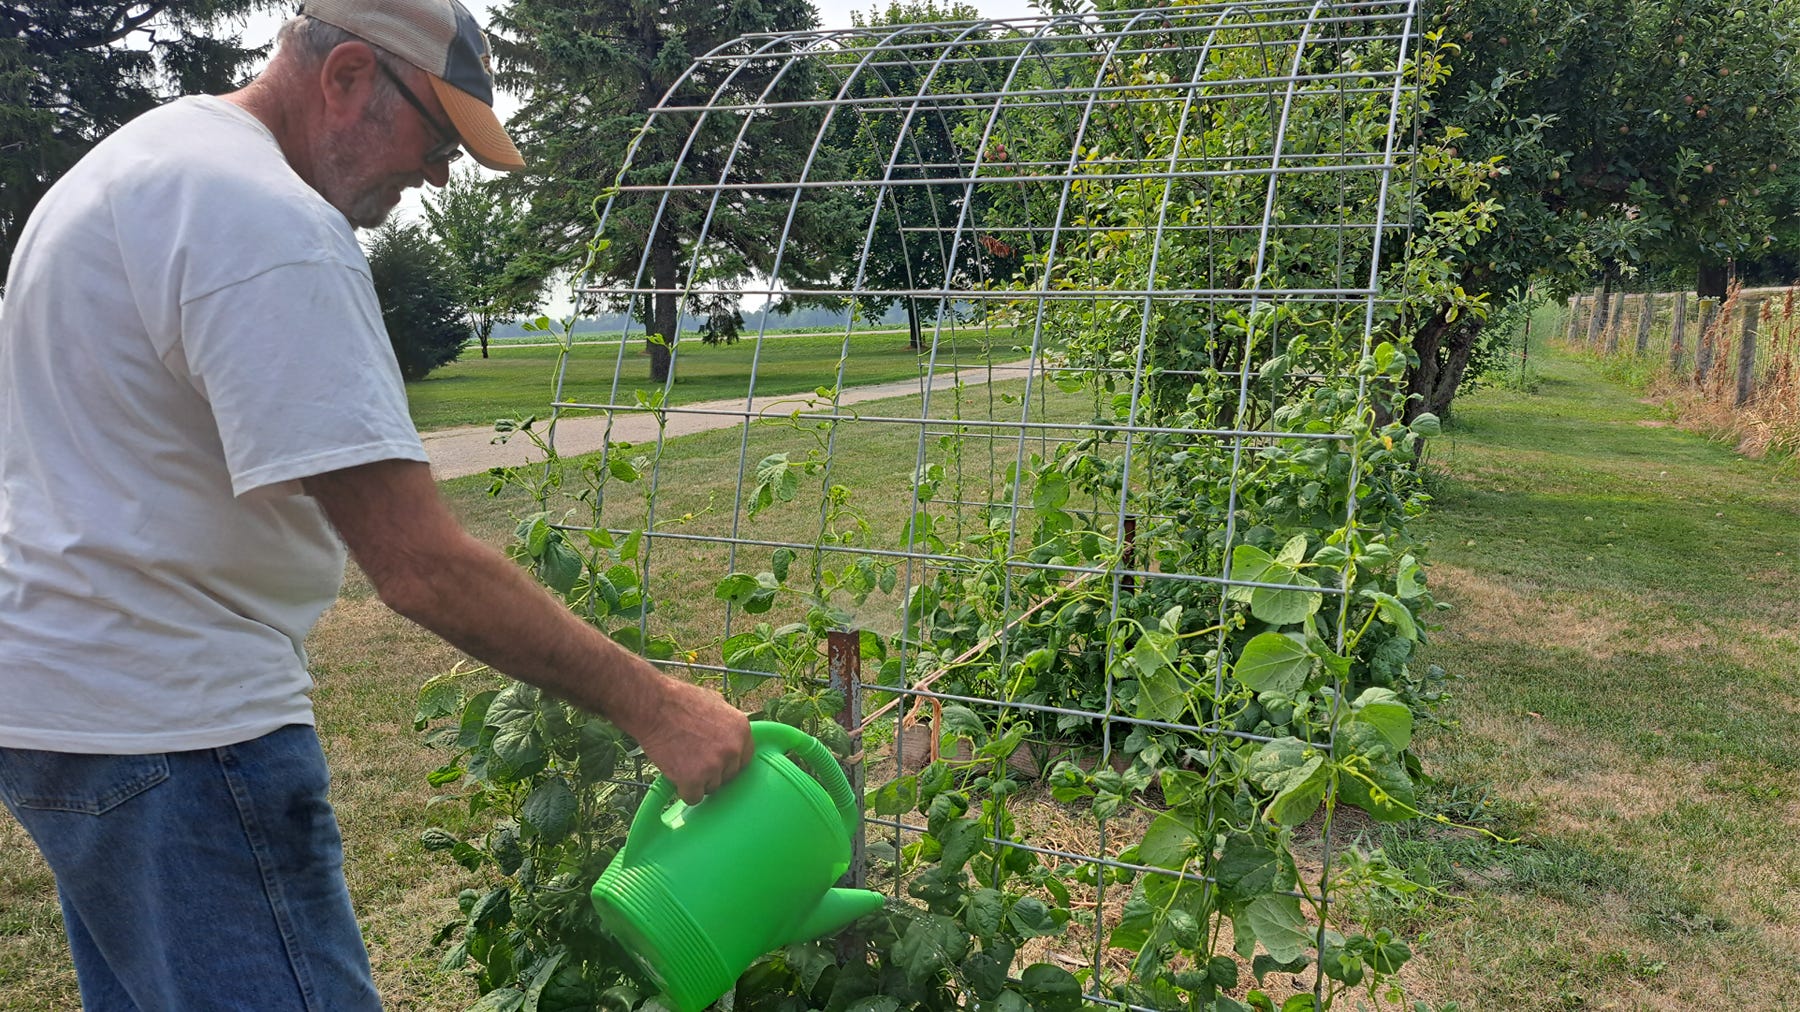 older man waters green bean plants growing on a trellis with a green watering can